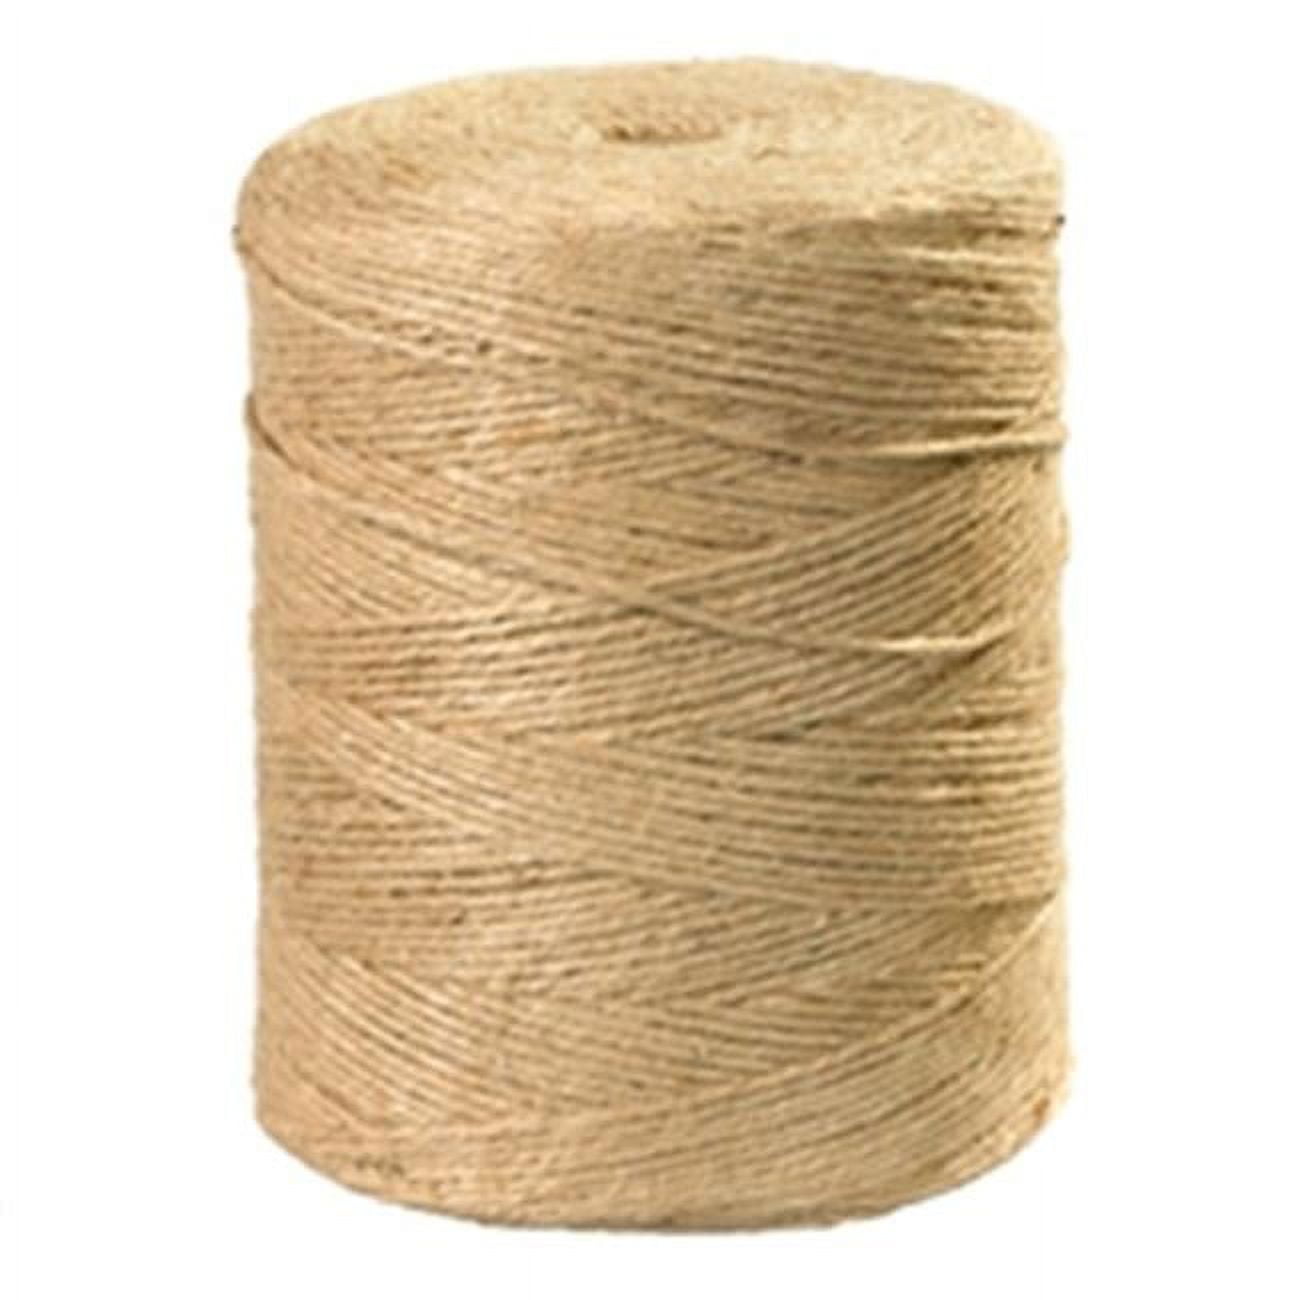 Picture of Box Partners TWJ370 4-Ply 110 lbs Natural Jute Twine